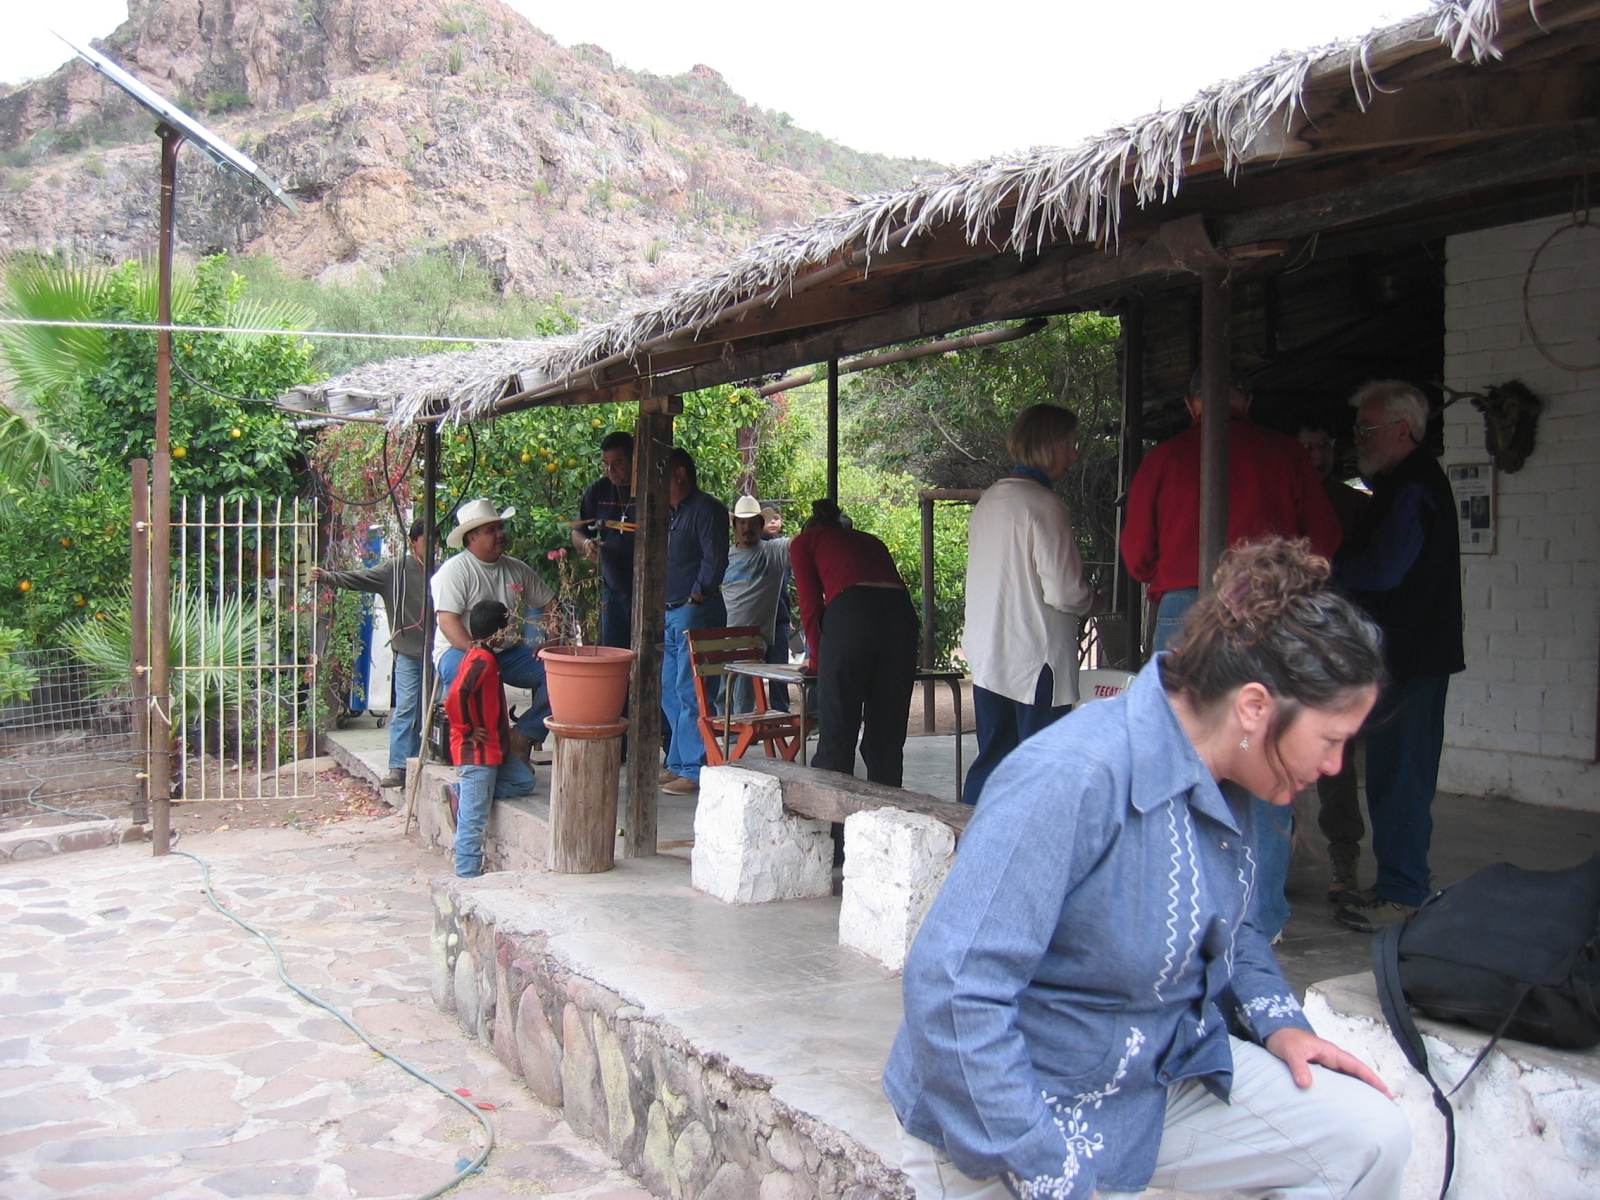 We finally arrived at the rancho.  This is a photo from our visit in 2004.  We were lucky to find Don Jaime Gorosave and his family there for the holidays.